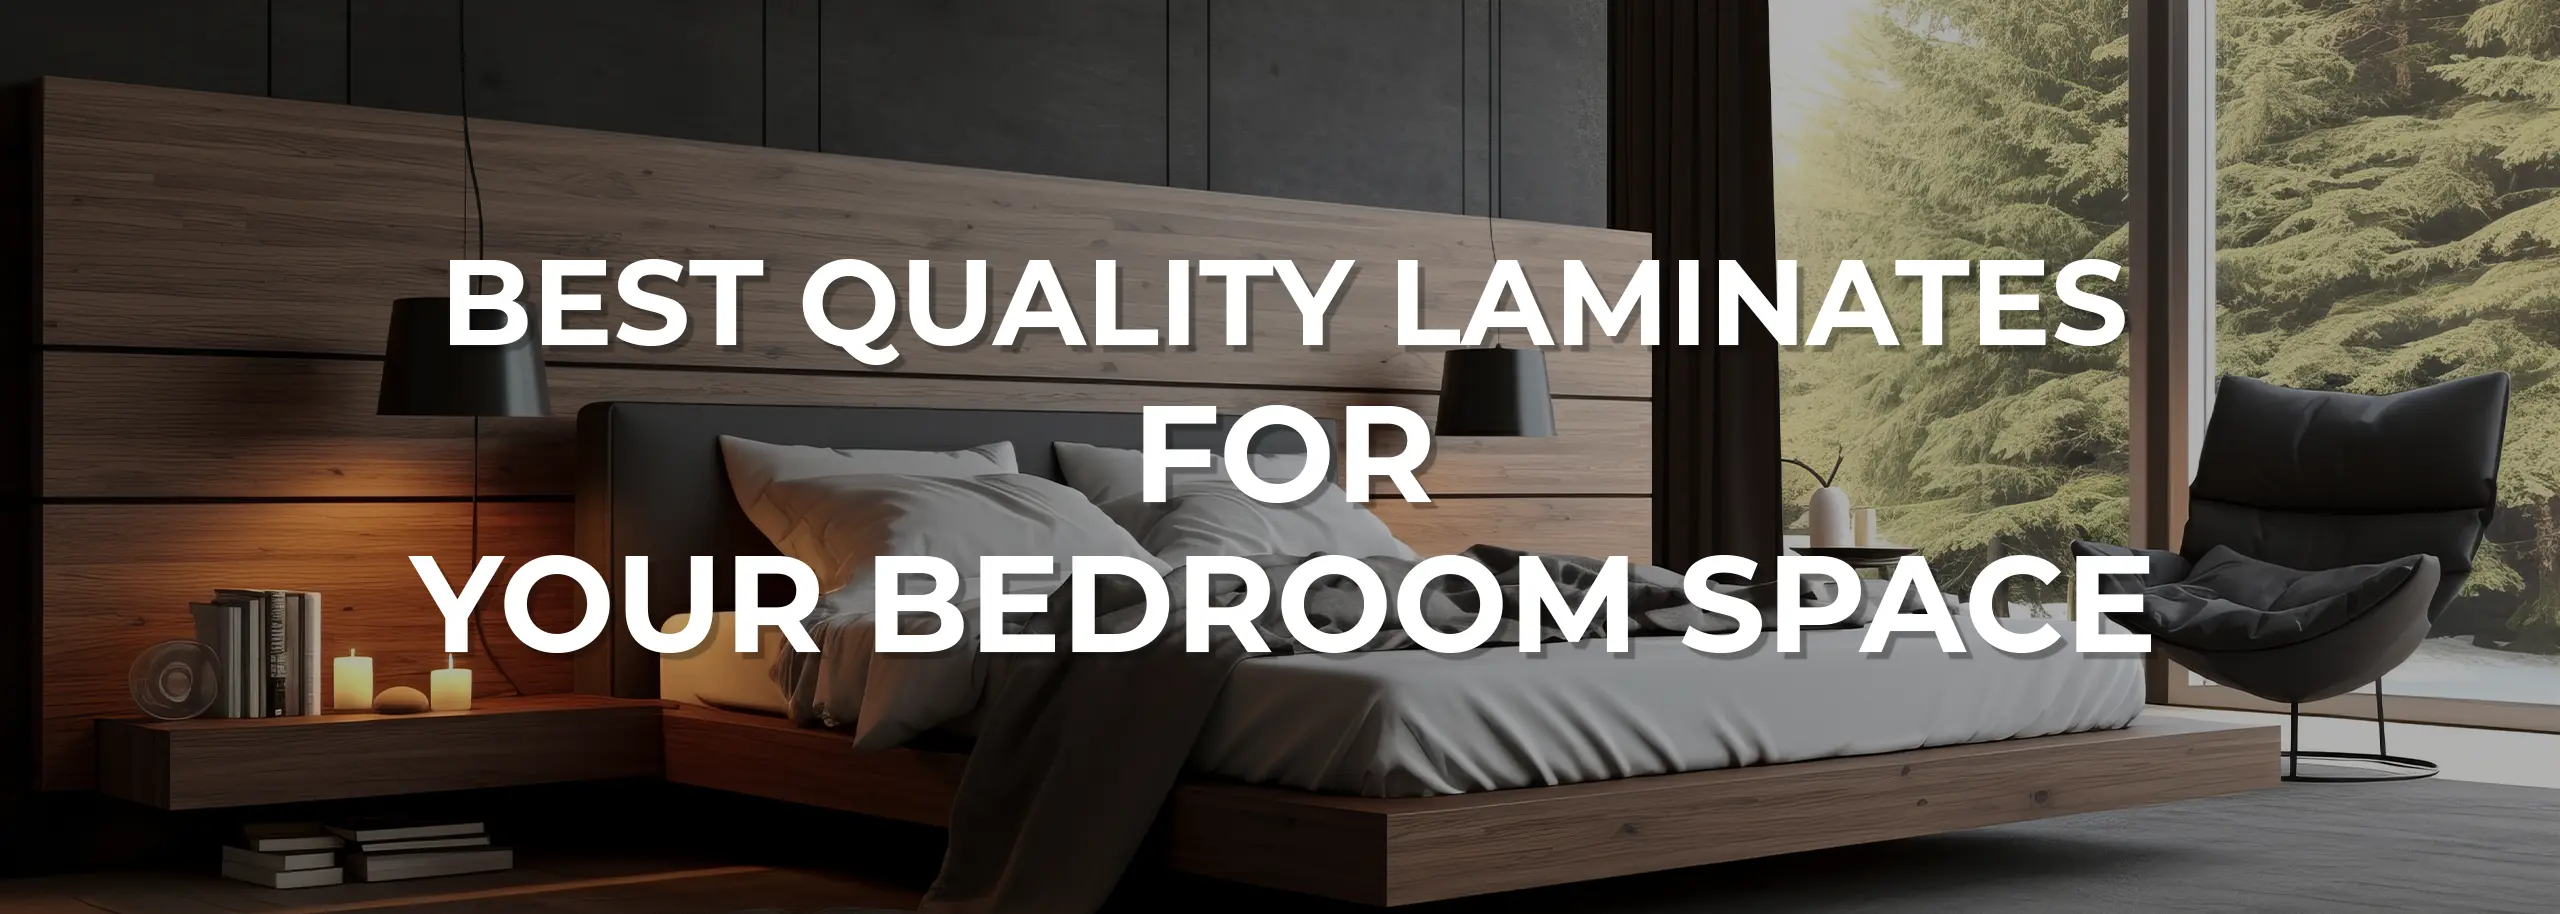 best quality laminates for you bedroom spaces